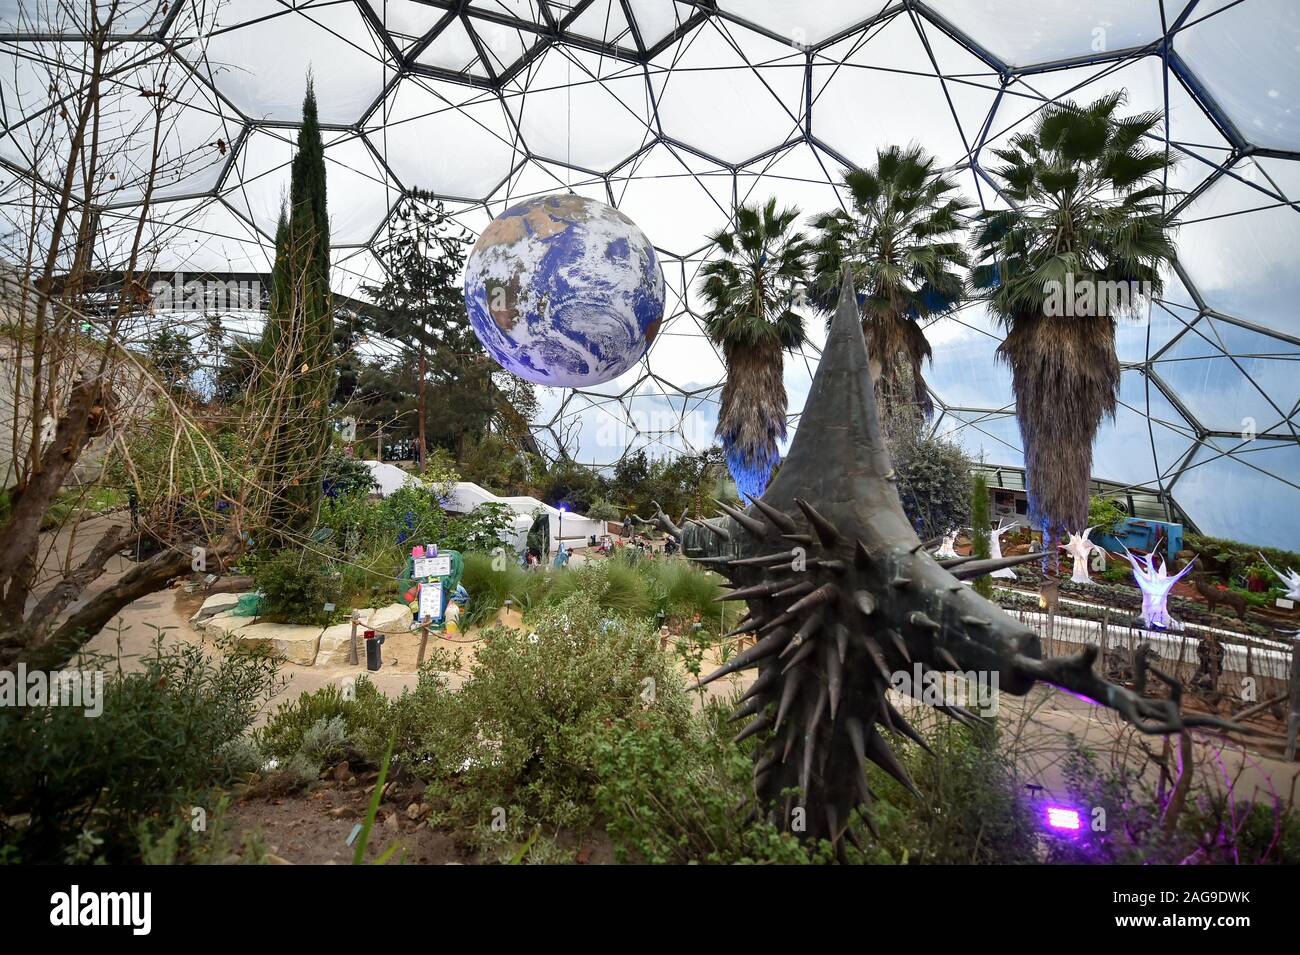 Luke Jerram's art installation 'Gaia', a replica of planet earth created using detailed NASA imagery of the Earth's surface, hangs on display at the Eden Project in St Austell, Cornwall. Stock Photo